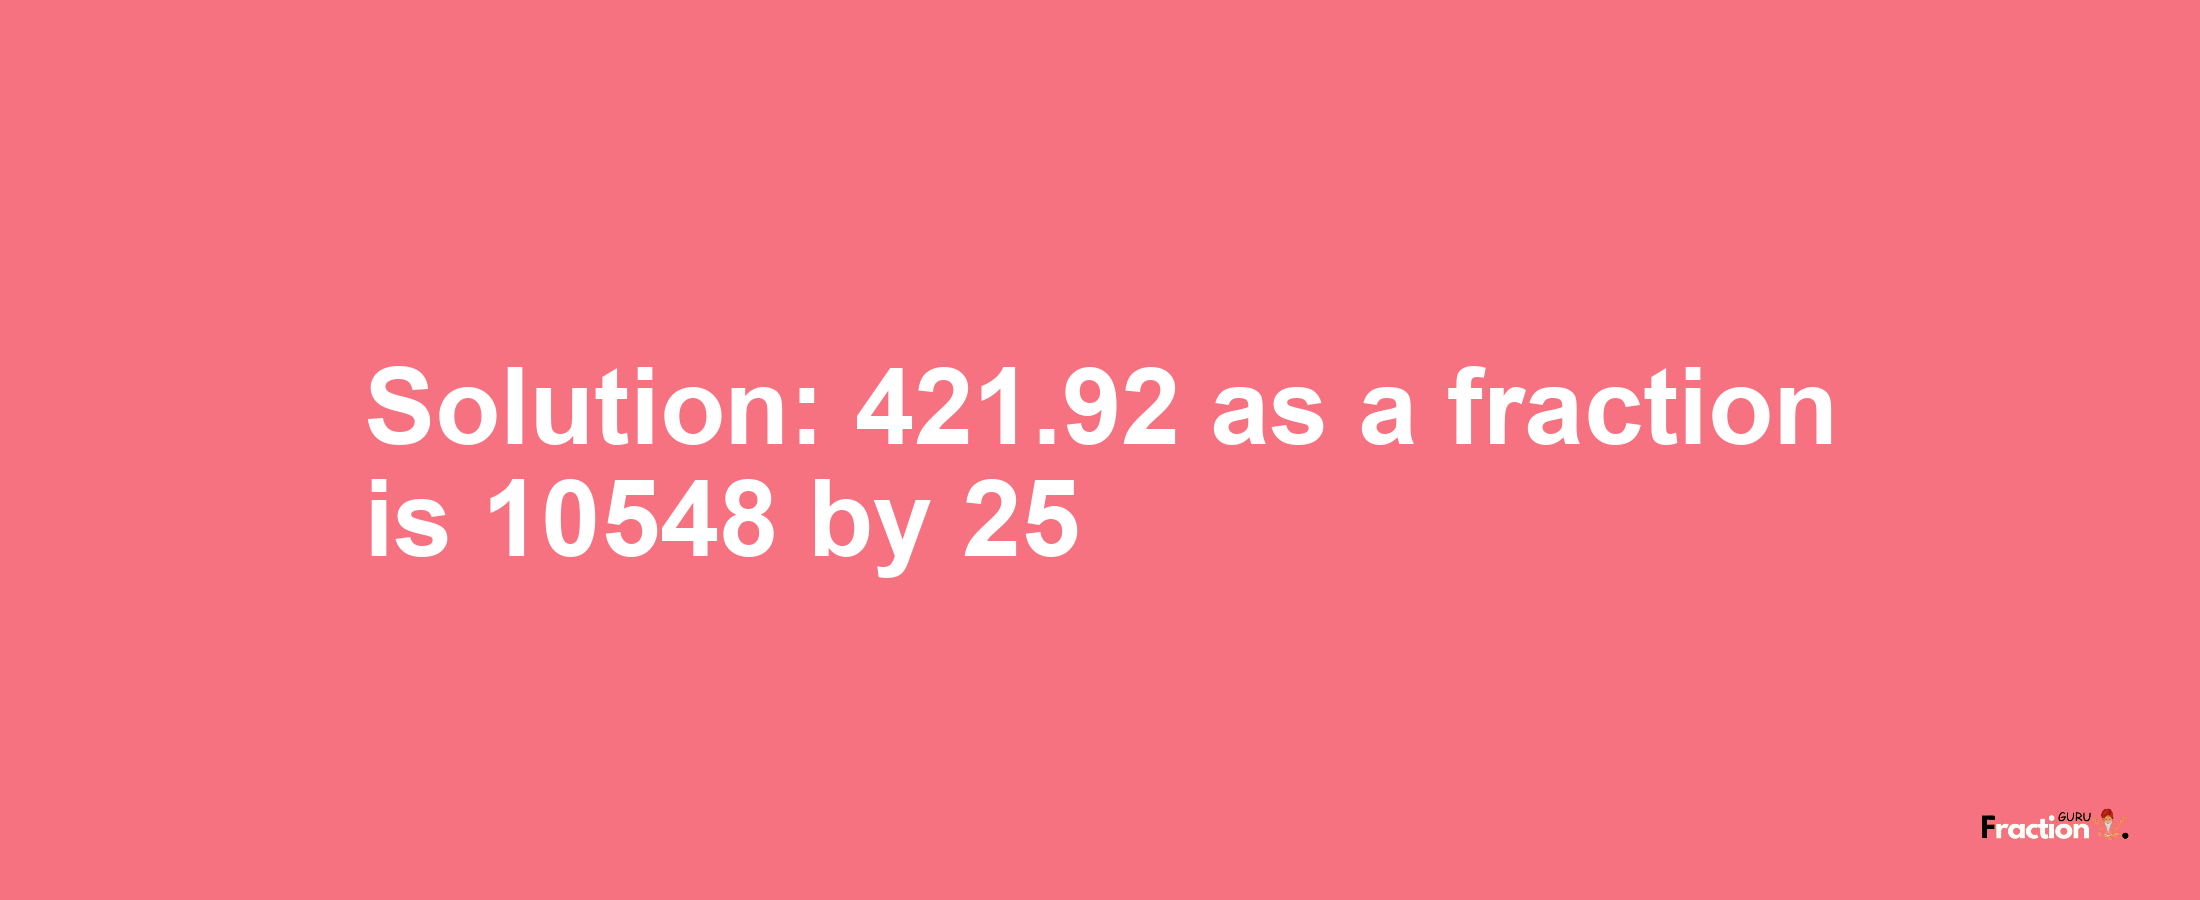 Solution:421.92 as a fraction is 10548/25